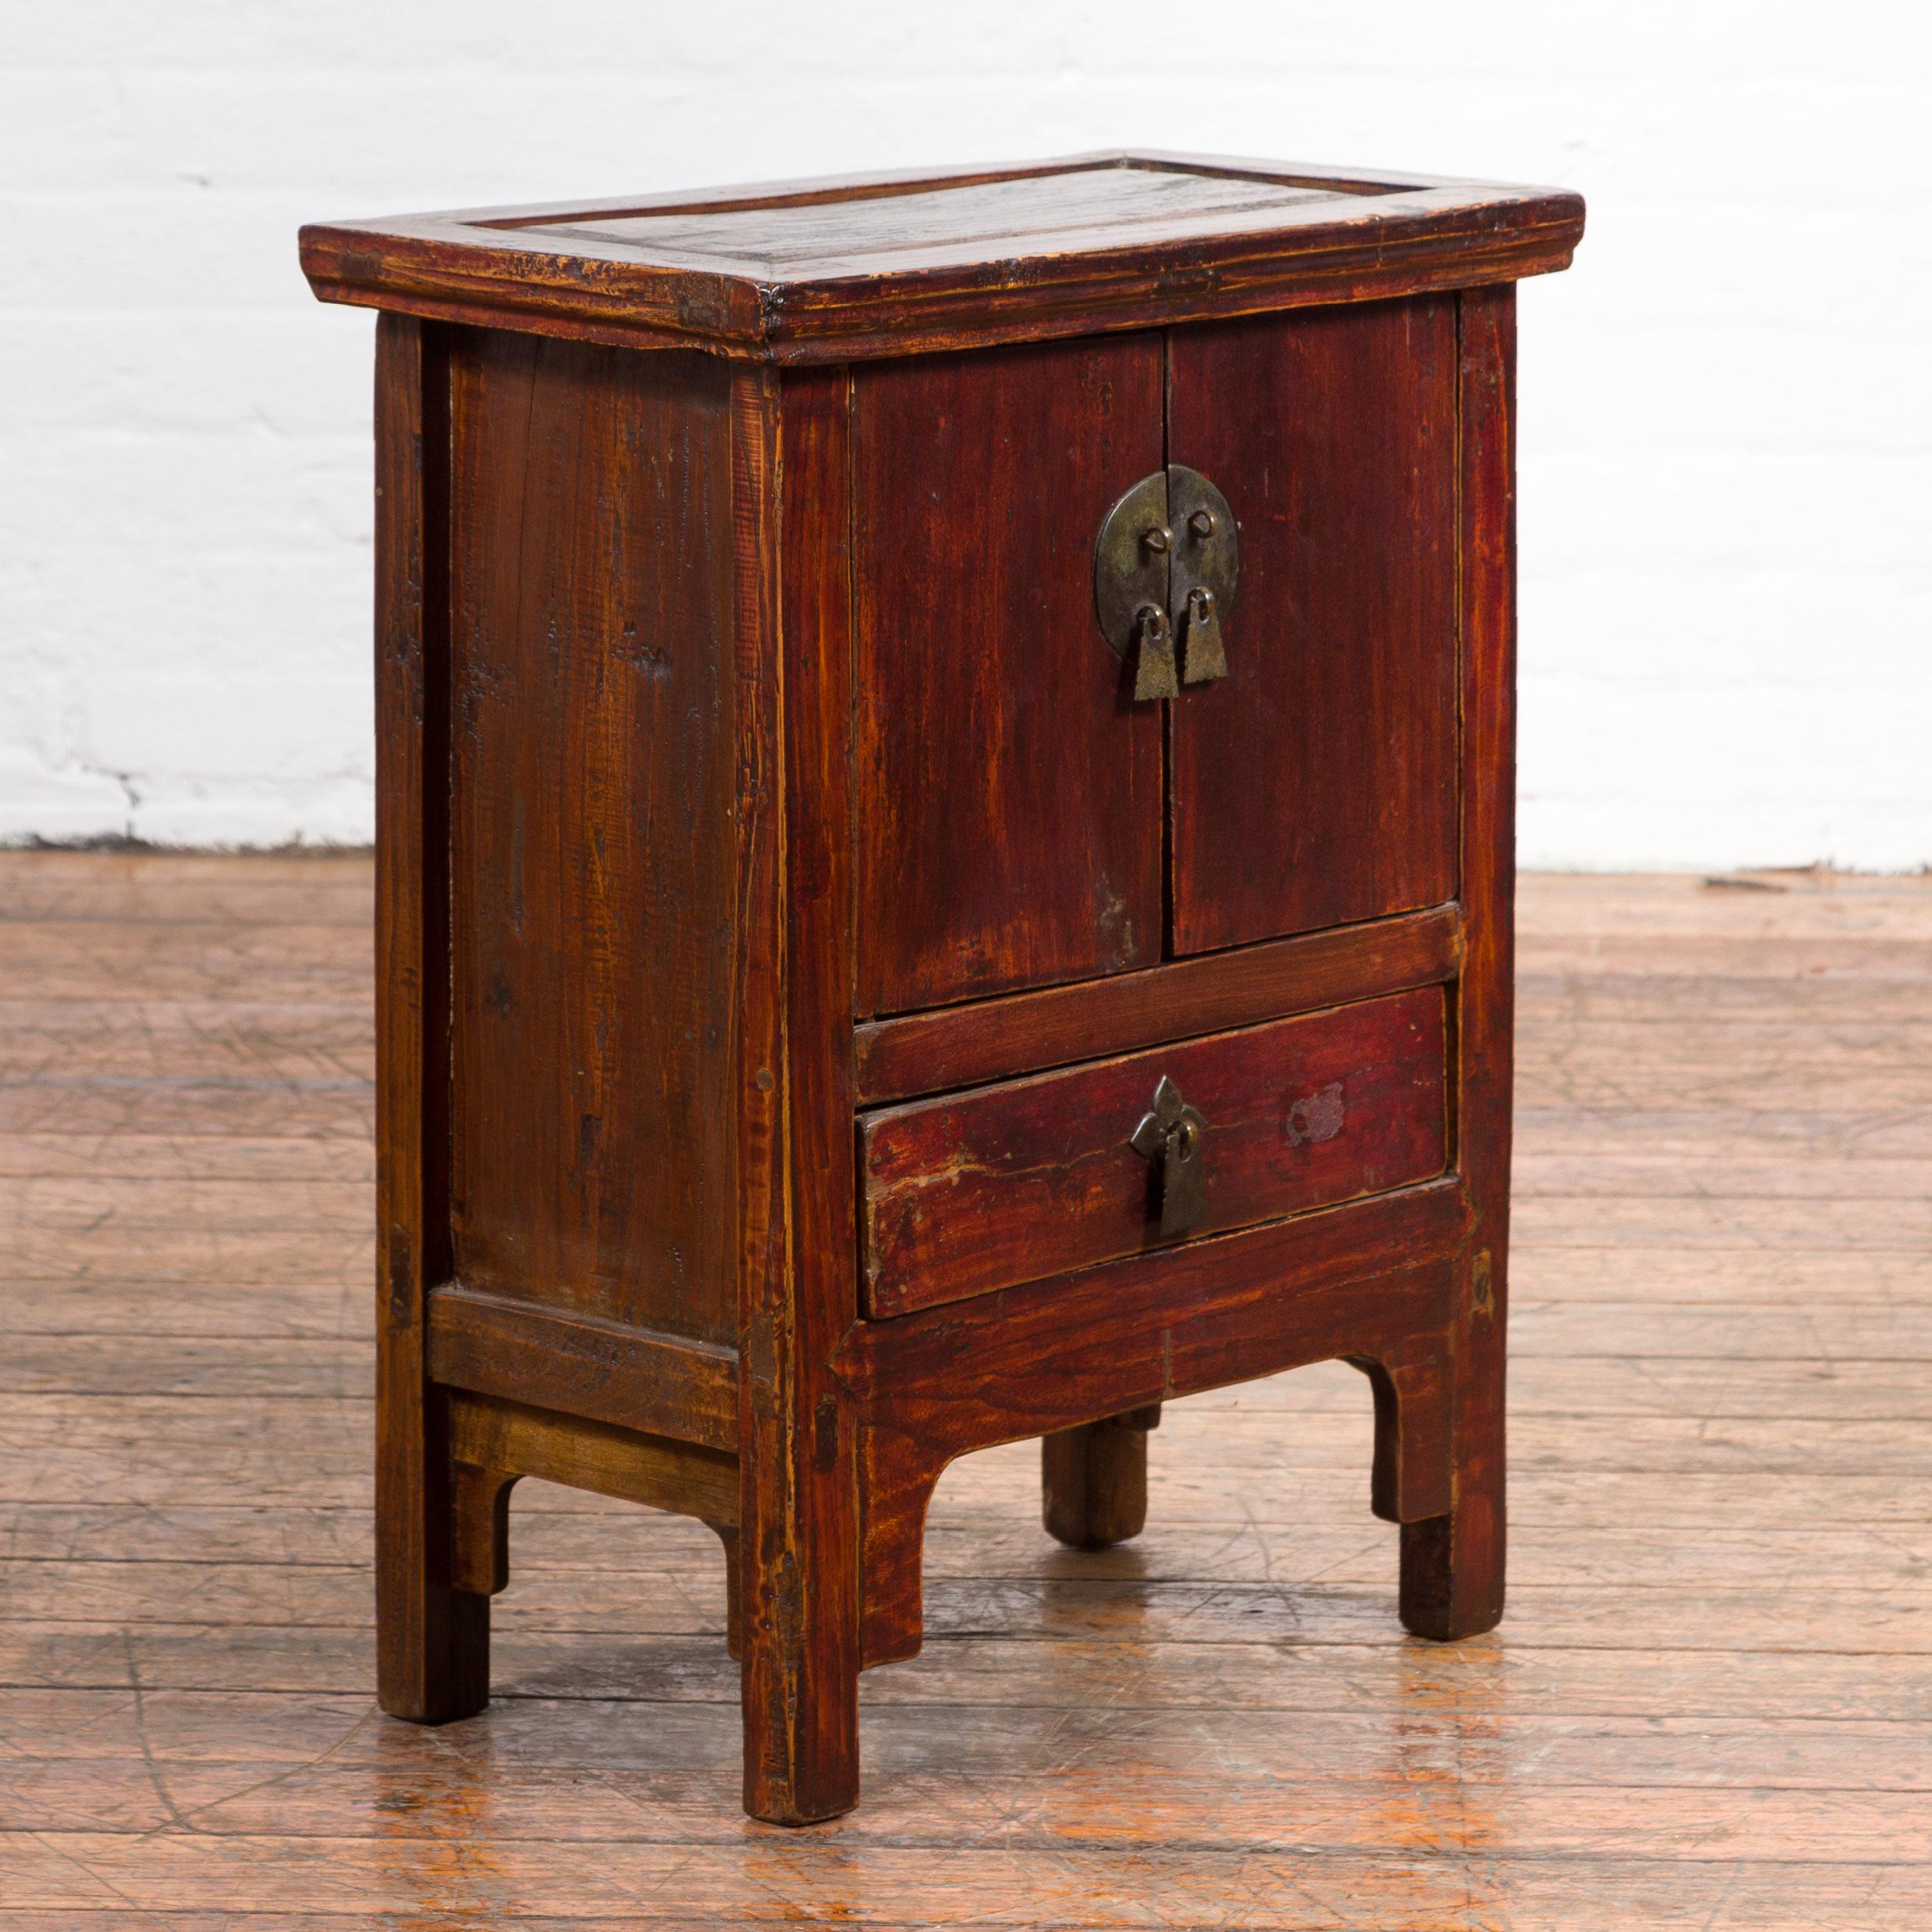 A Chinese Qing Dynasty period bedside table from the 19th century, with double doors and low drawer. Created in China during the Qing Dynasty, this bedside table features a rectangular top with central board overhanging a façade made of two doors